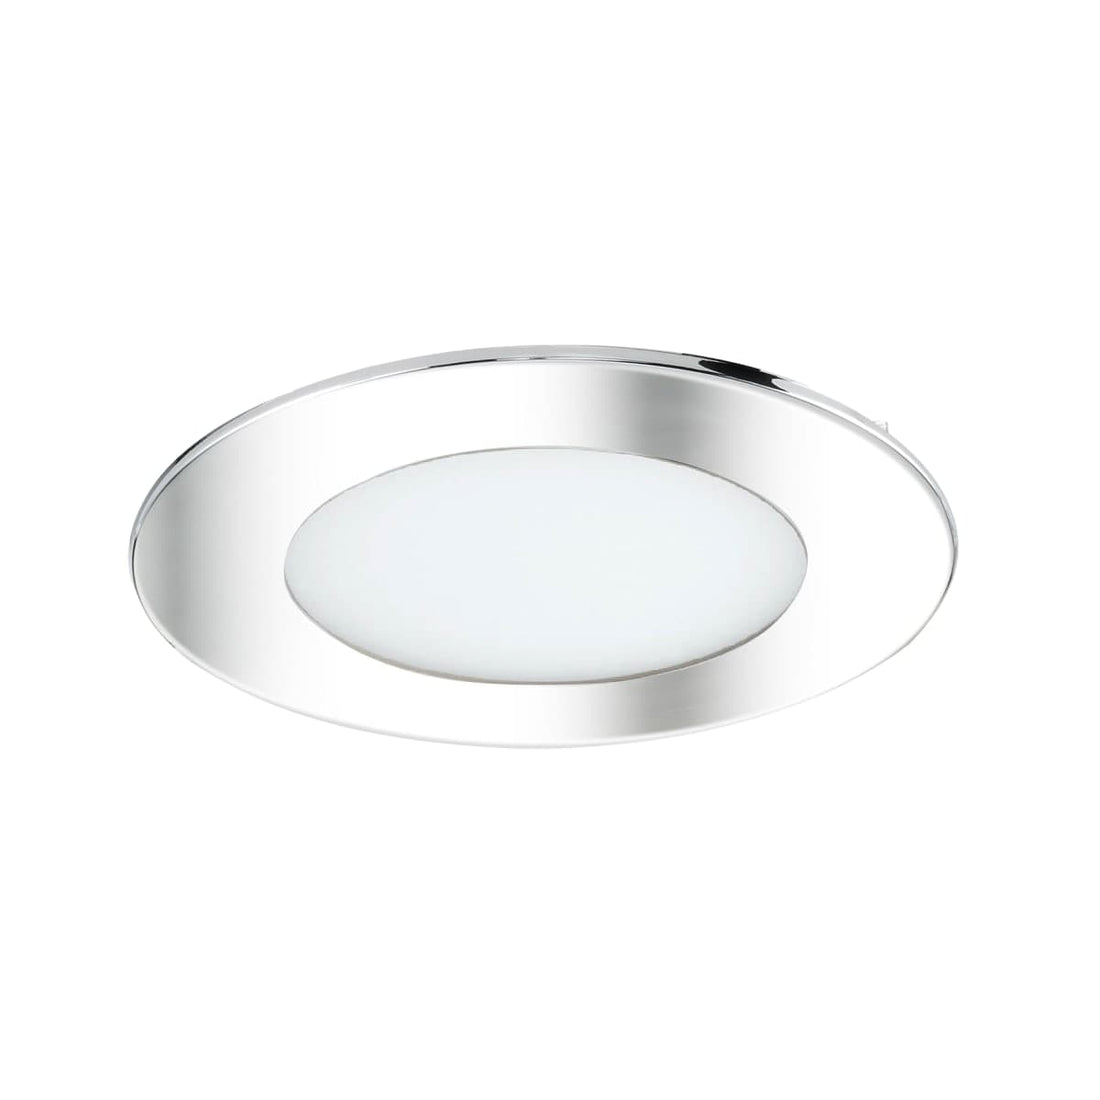 RECESSED SPOTLIGHT BATH ALUMINIUM SILVER D10.8 LED 9W WARM AND NATURAL LIGHT DIMMABLE IP44 - best price from Maltashopper.com BR420003744